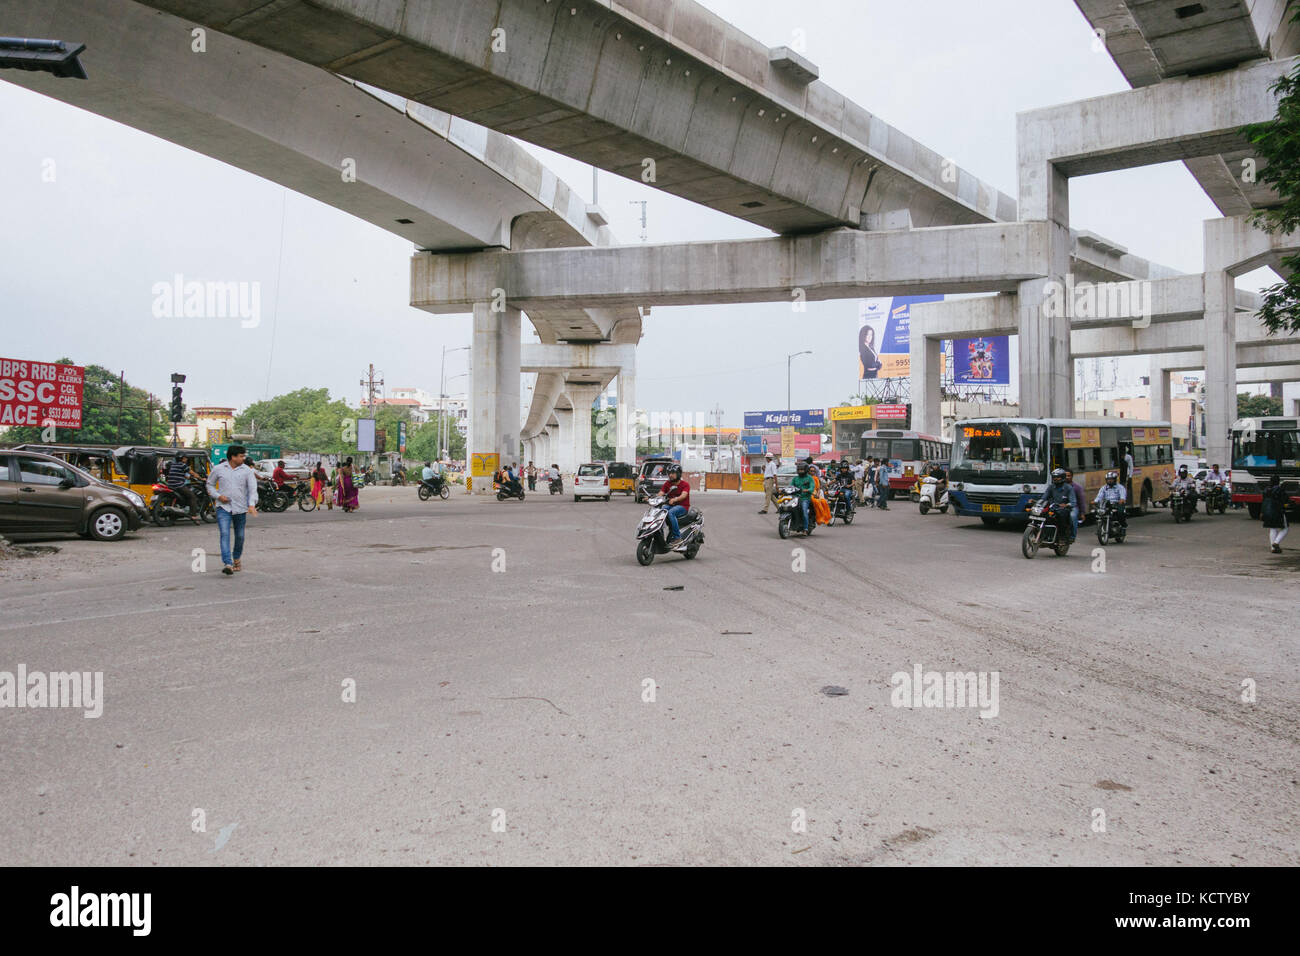 HYDERABAD,INDIA-07th OCTOBER,2017.Pedestrians jaywalking at a busy street in Hyderabad,India Stock Photo